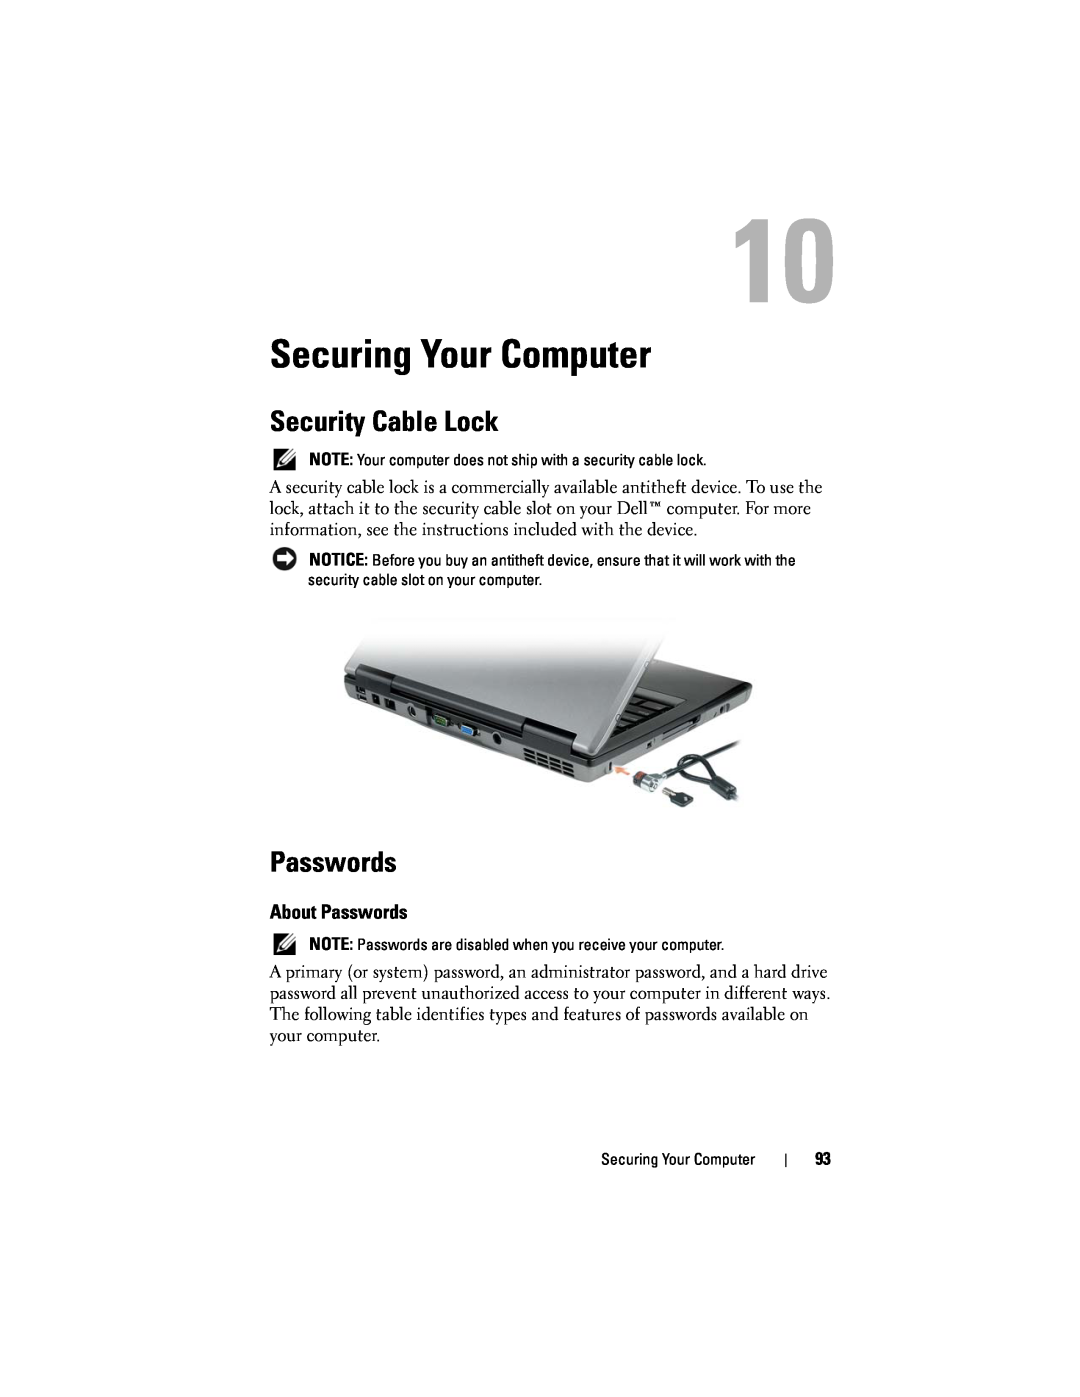 Dell D530 manual Securing Your Computer, Security Cable Lock, About Passwords 